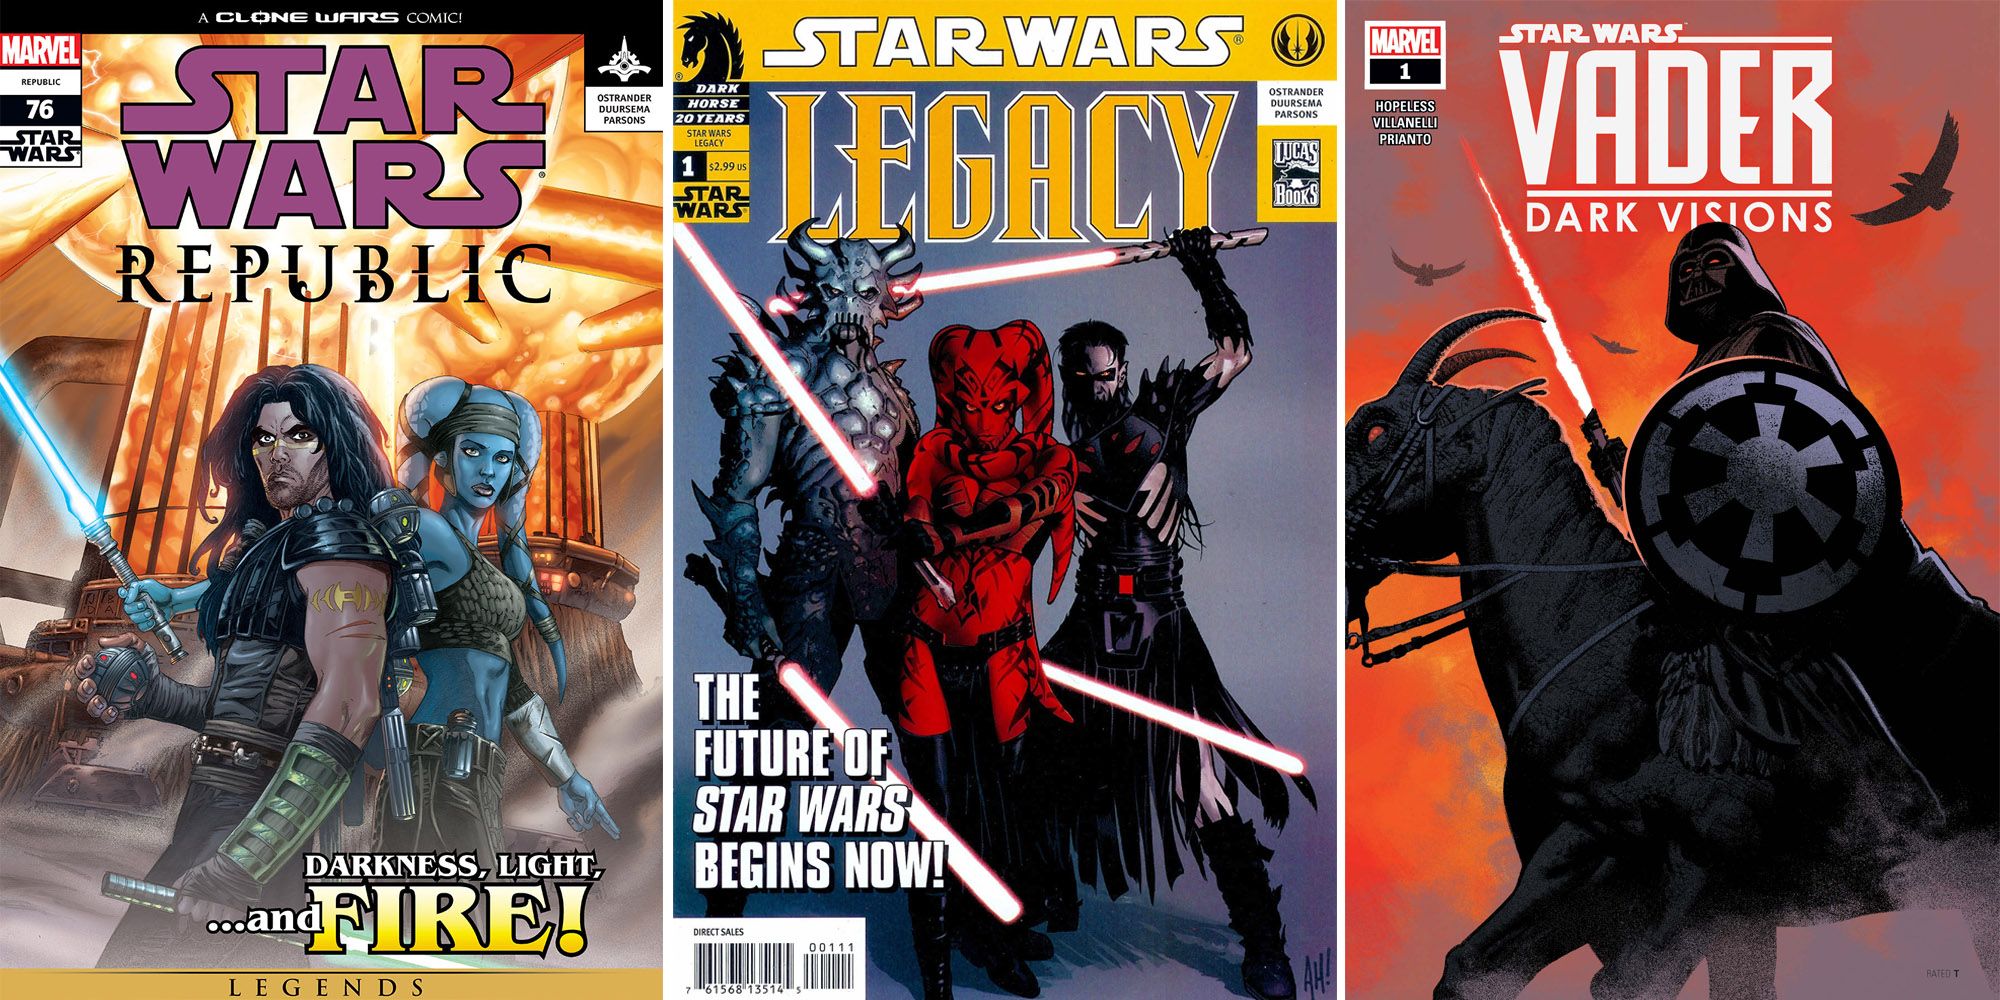 Star Wars Republic, Legacy, and Vader Dark Visions covers for comic books